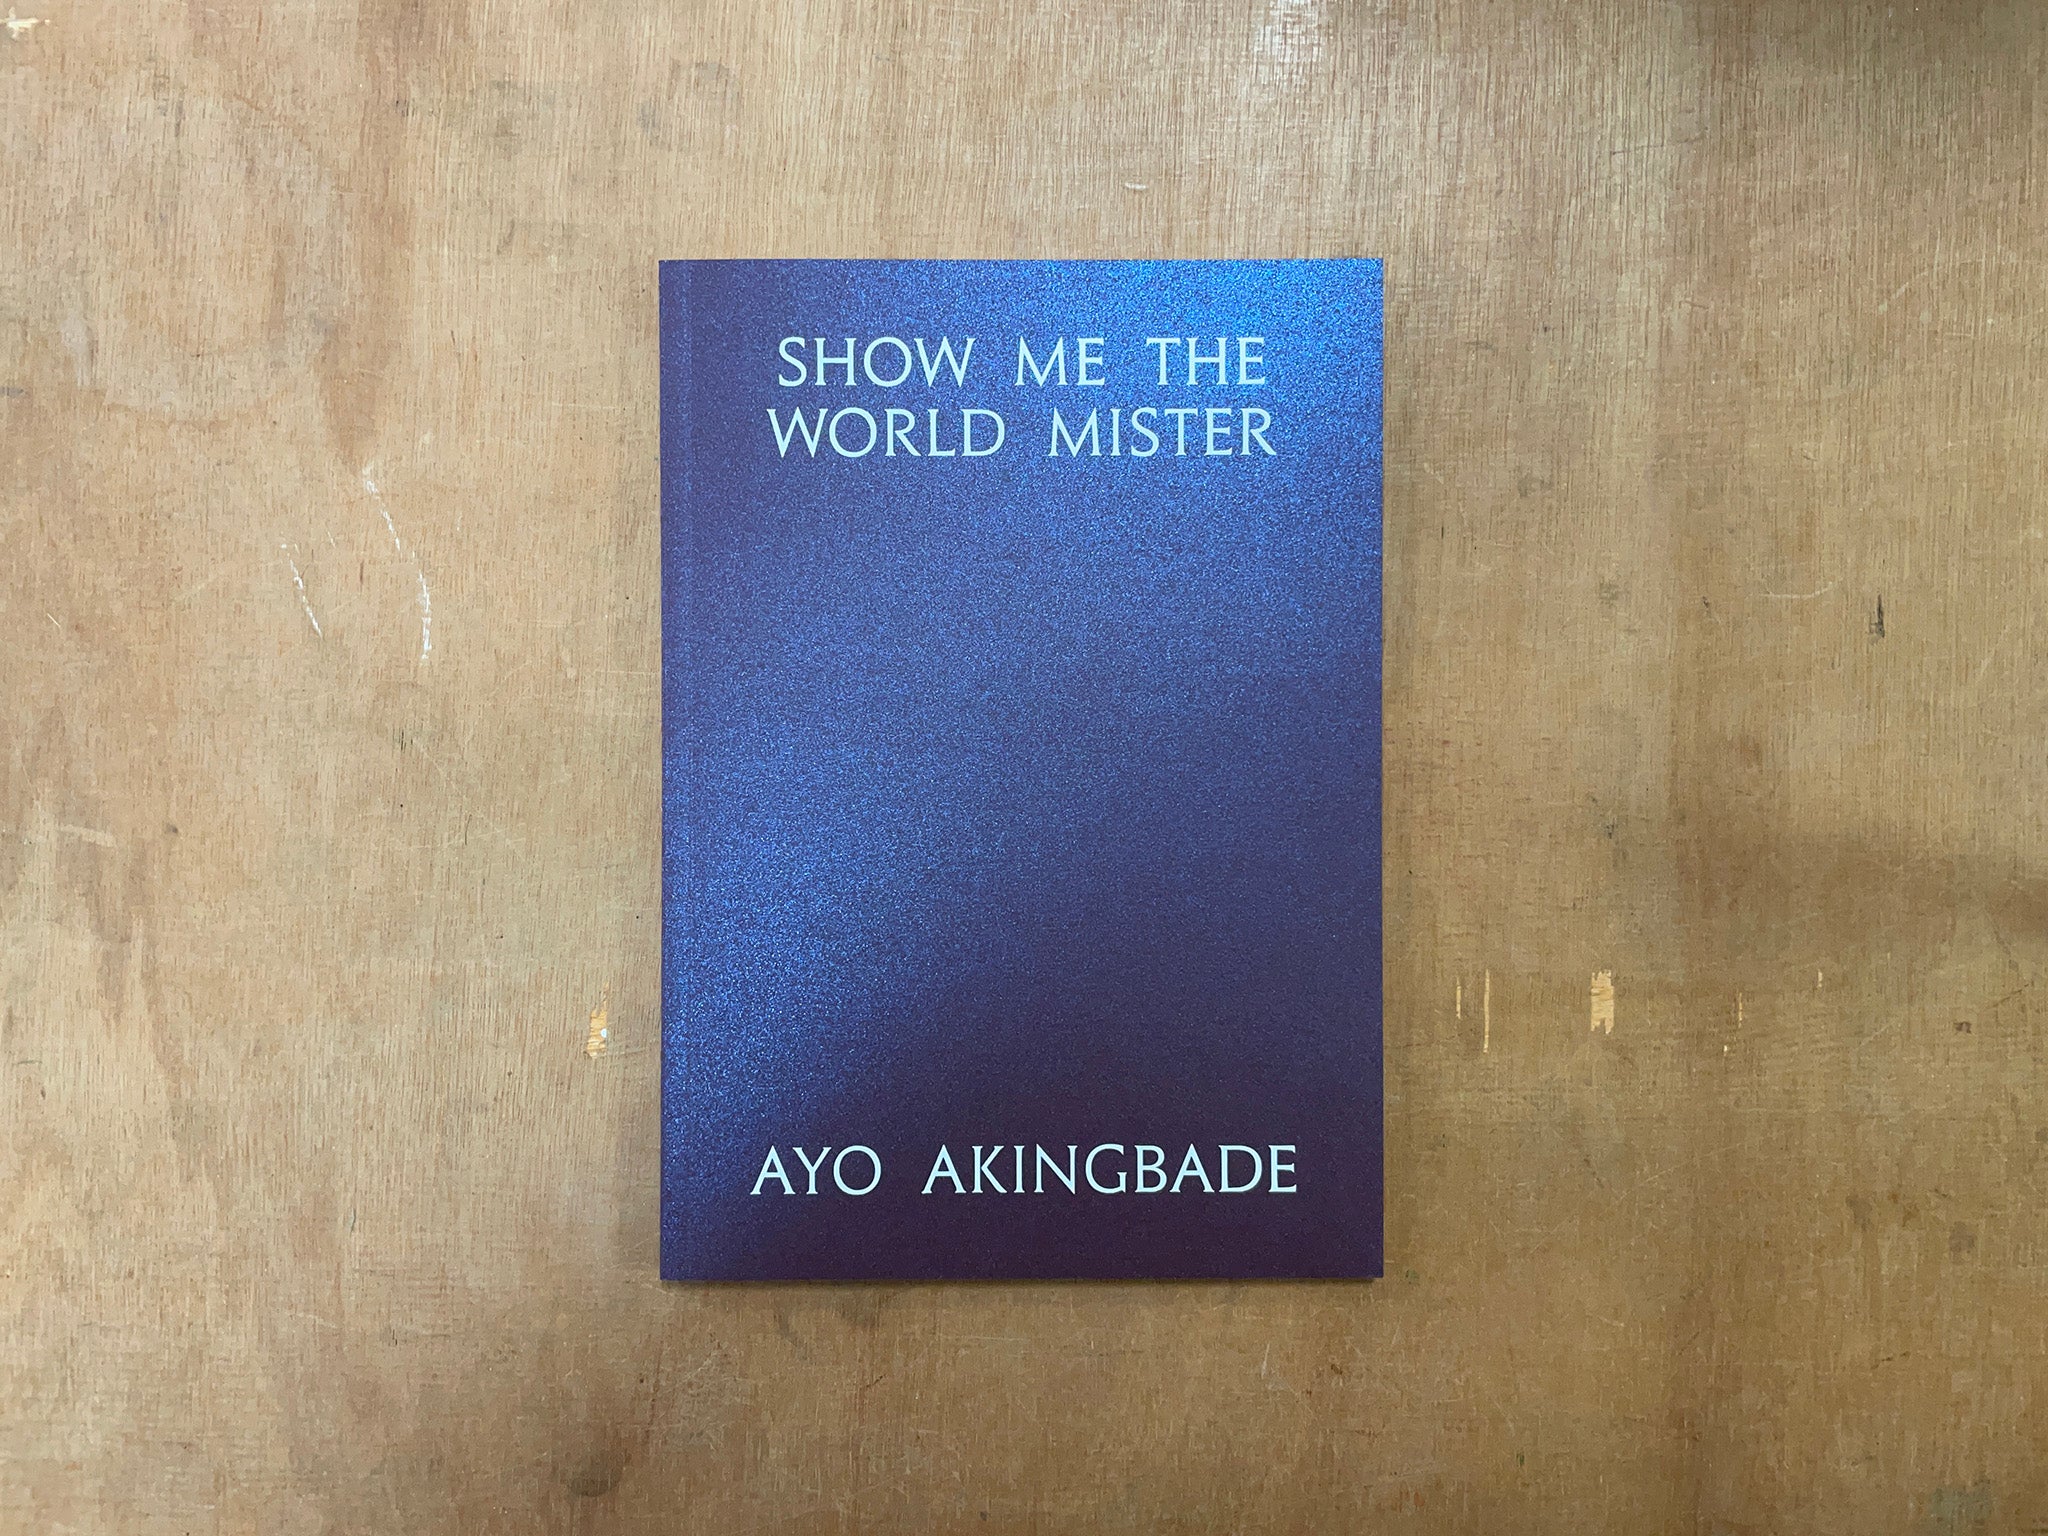 SHOW ME THE WORLD MISTER by Ayo Akingbade